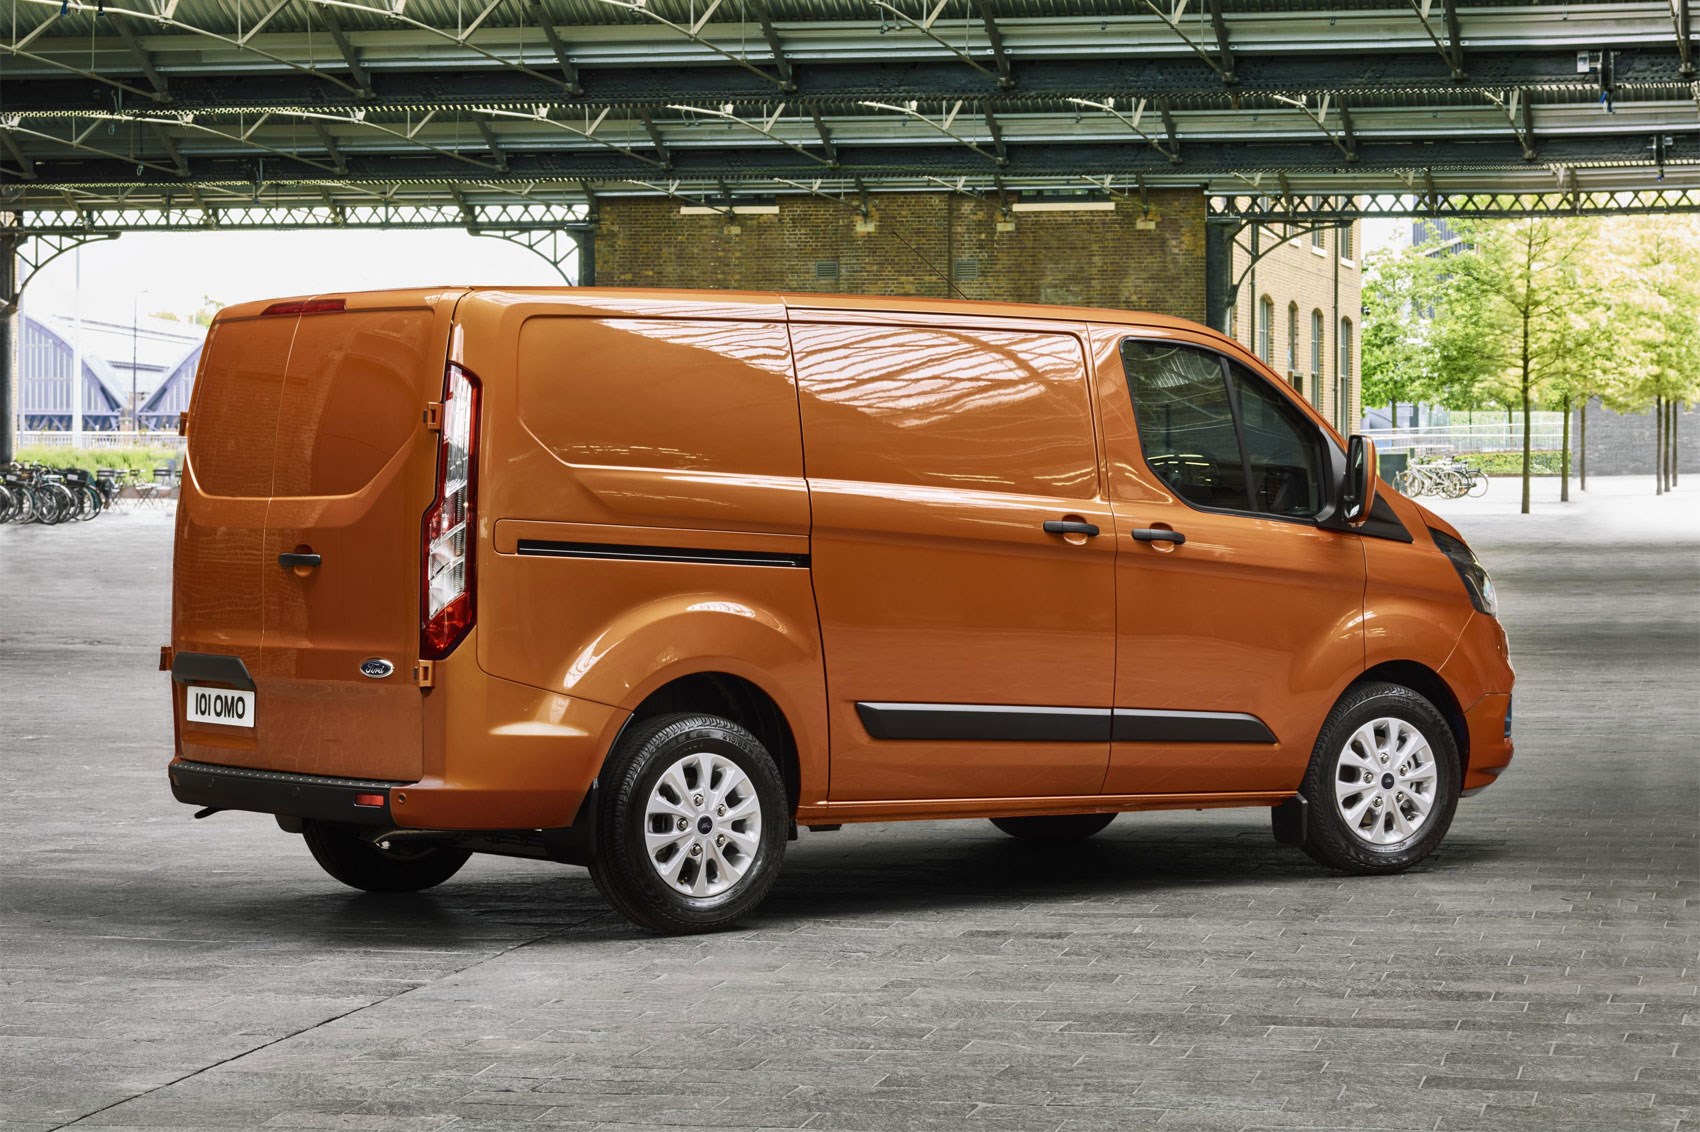 New Ford Transit Custom for 2018 info and pictures of facelift for UK s bestselling van Parkers